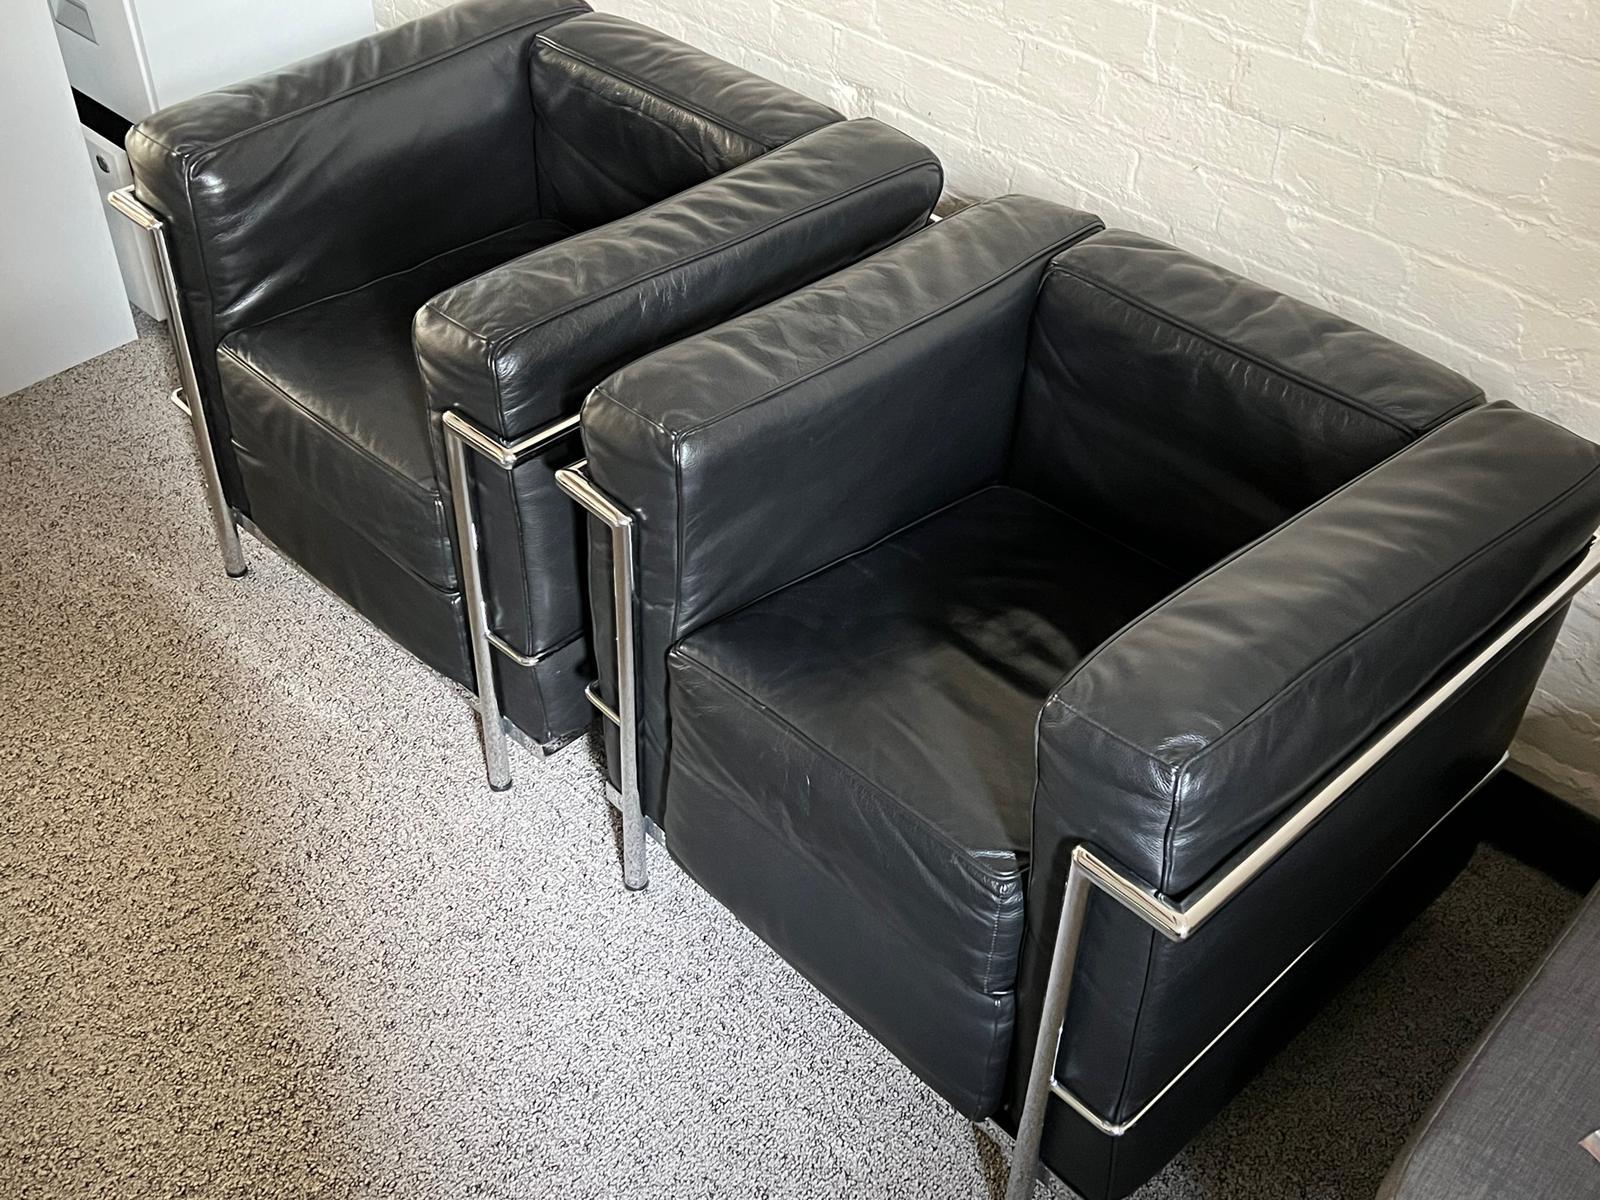 Exclusive LC2 armchair designed by Le Corbusier, Pierre Jeanneret and Charlotte Perriand for Conran. Designed in 1928 with a chrome tube frame and soft black leather. 

Iconic club chairs that have stood the test of time. Manufactured in 1998 and